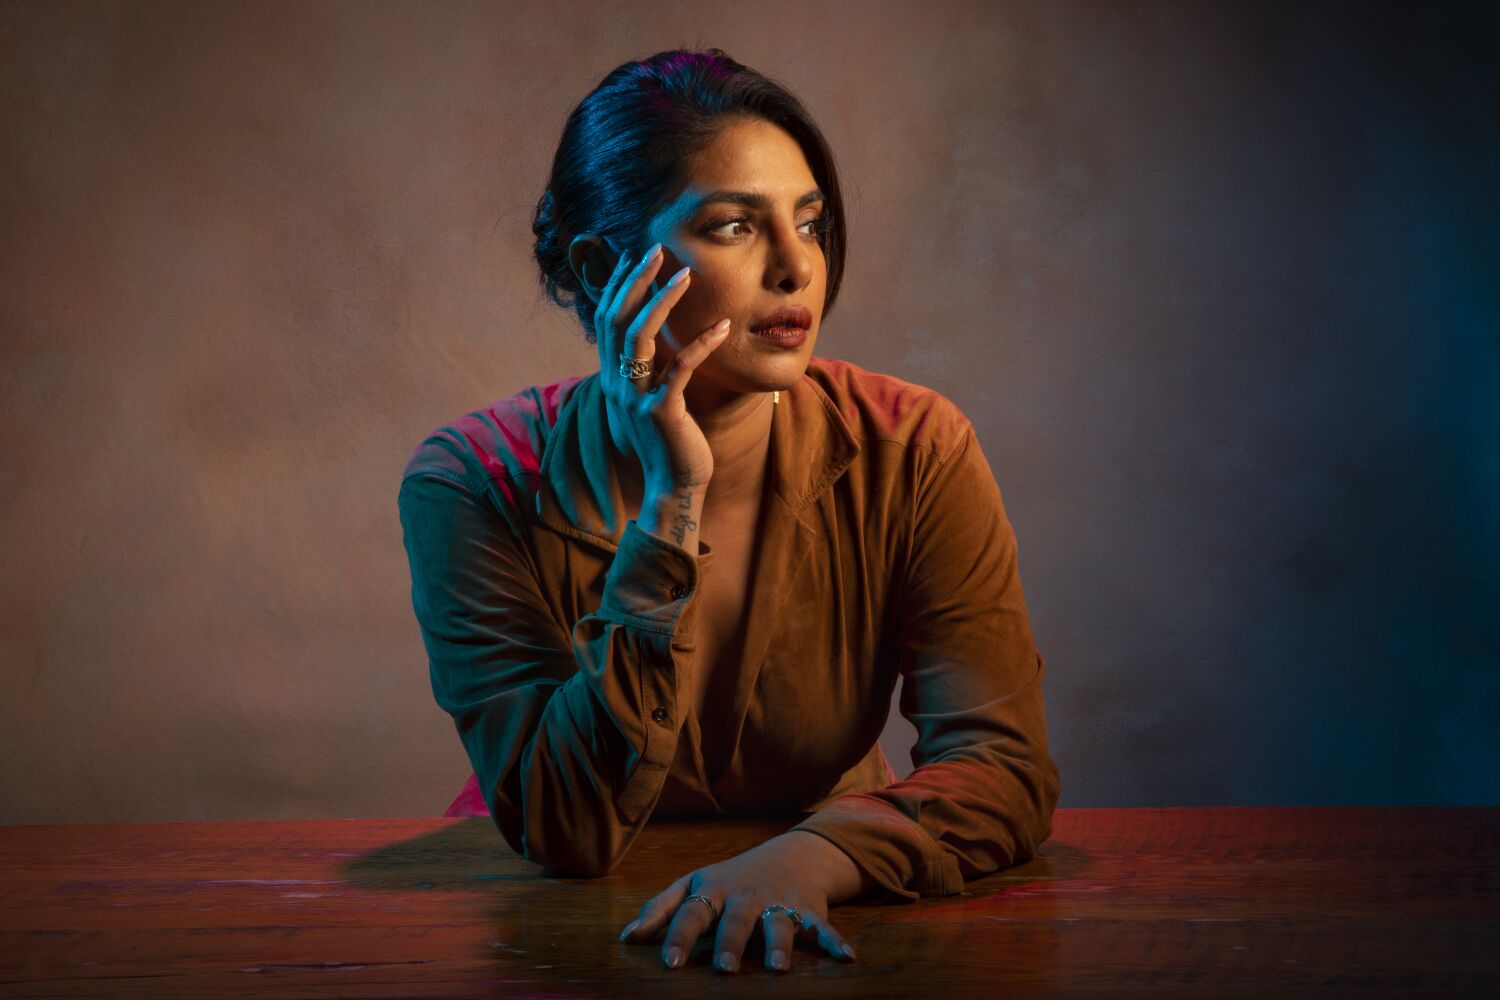 'Pushed into a corner,' Priyanka Chopra had 'beef' with people in Bollywood. So she left